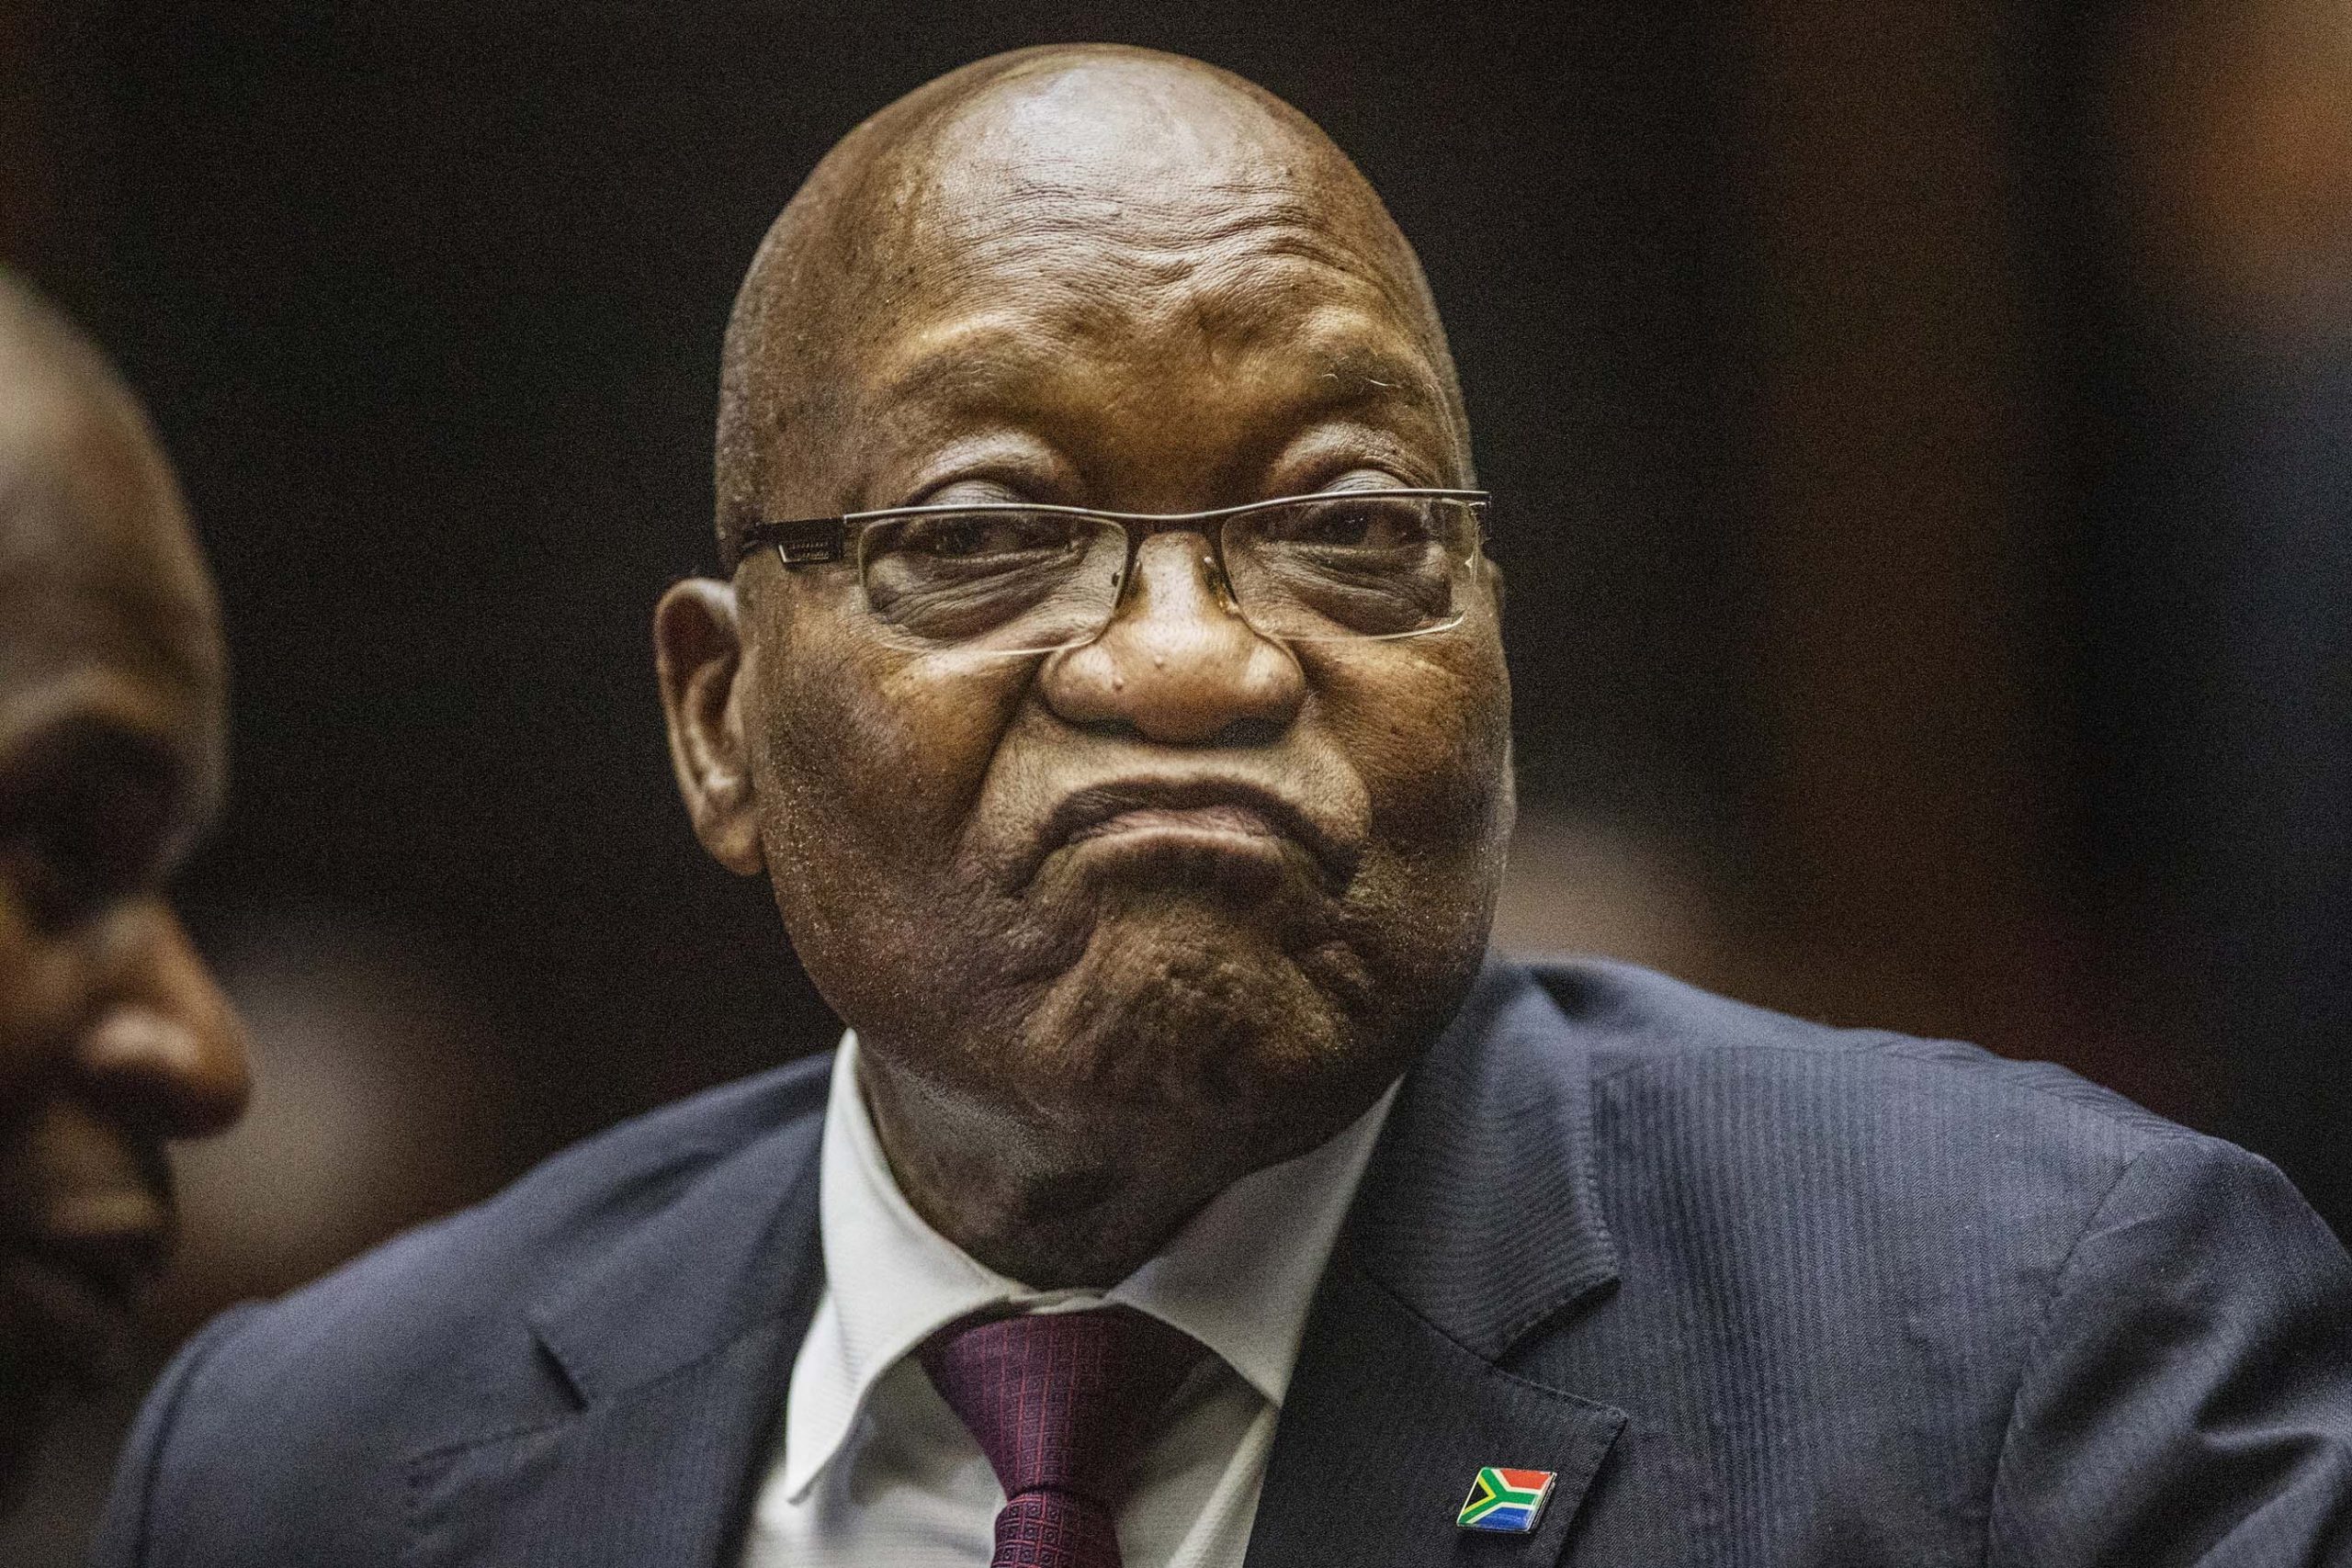 Former South African President turns himself in for 15-month sentence